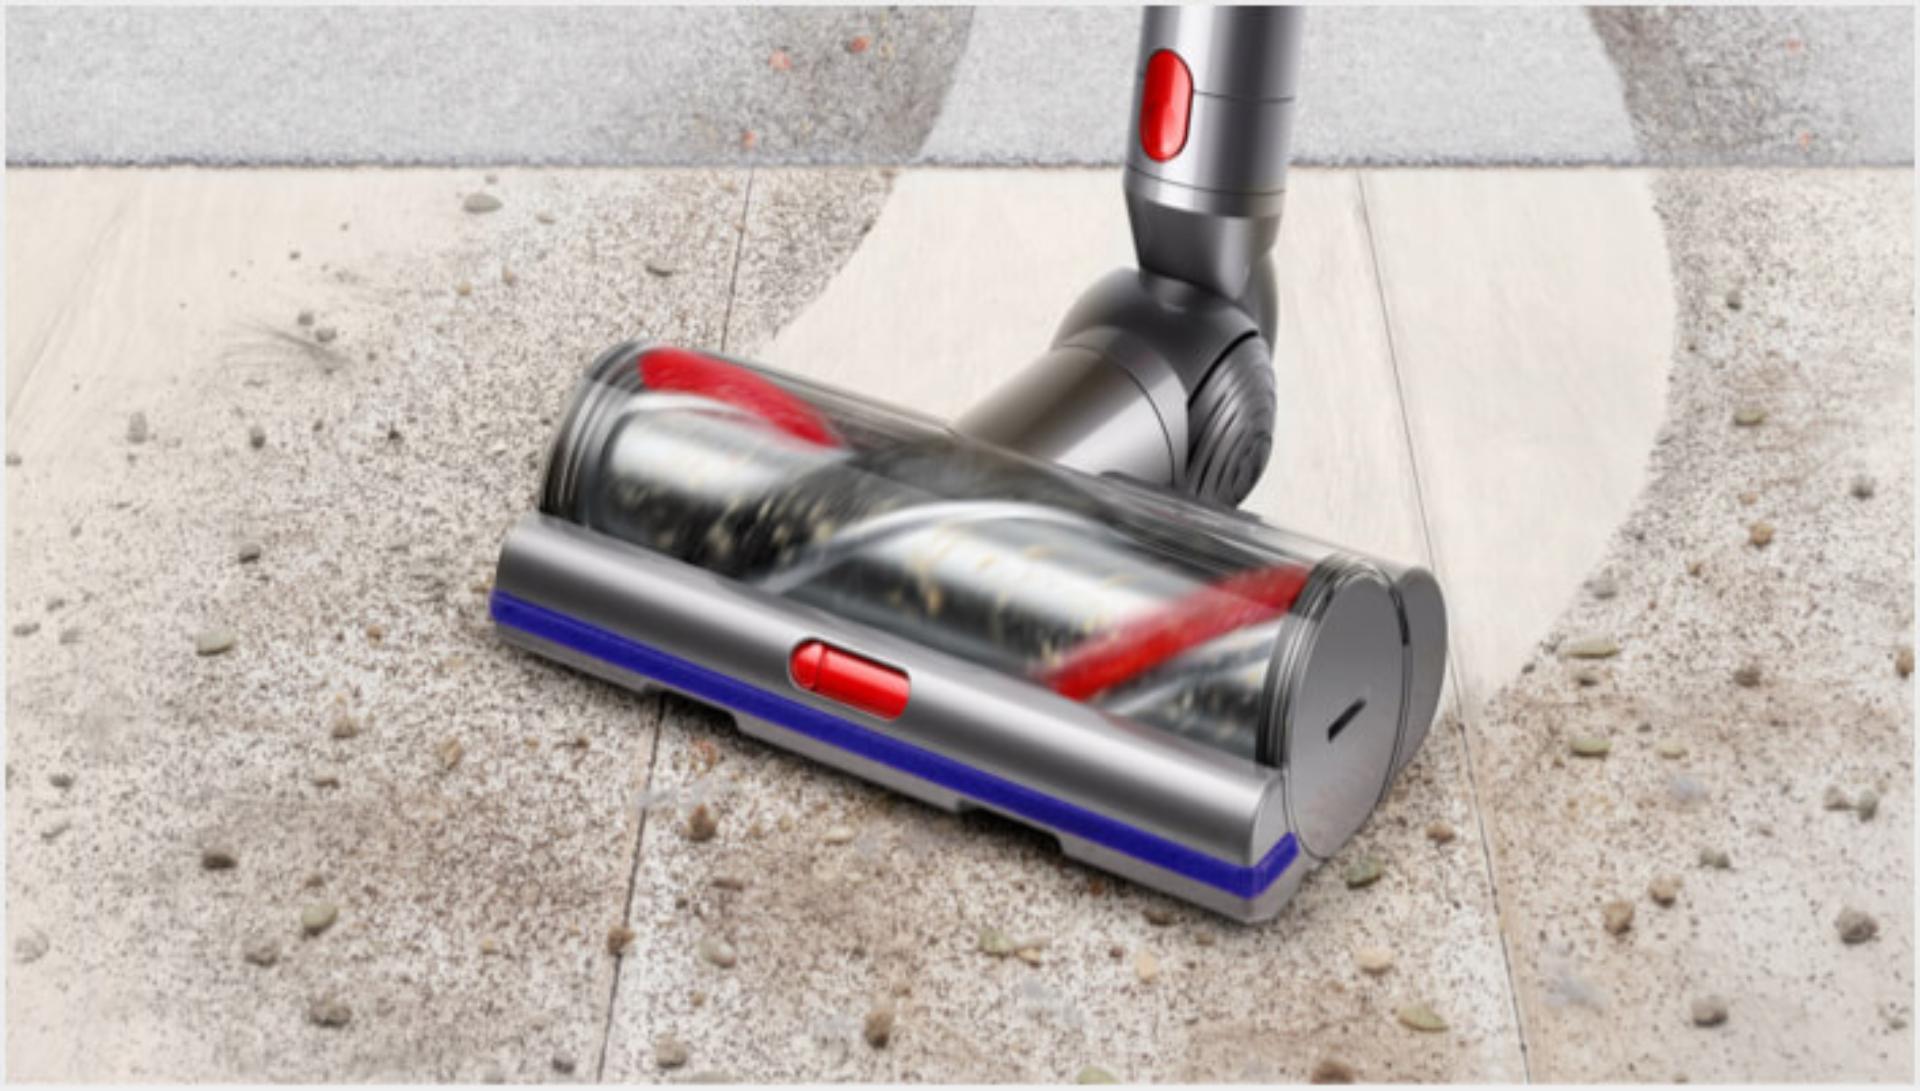 High Torque cleaner head cleaning different floor surfaces